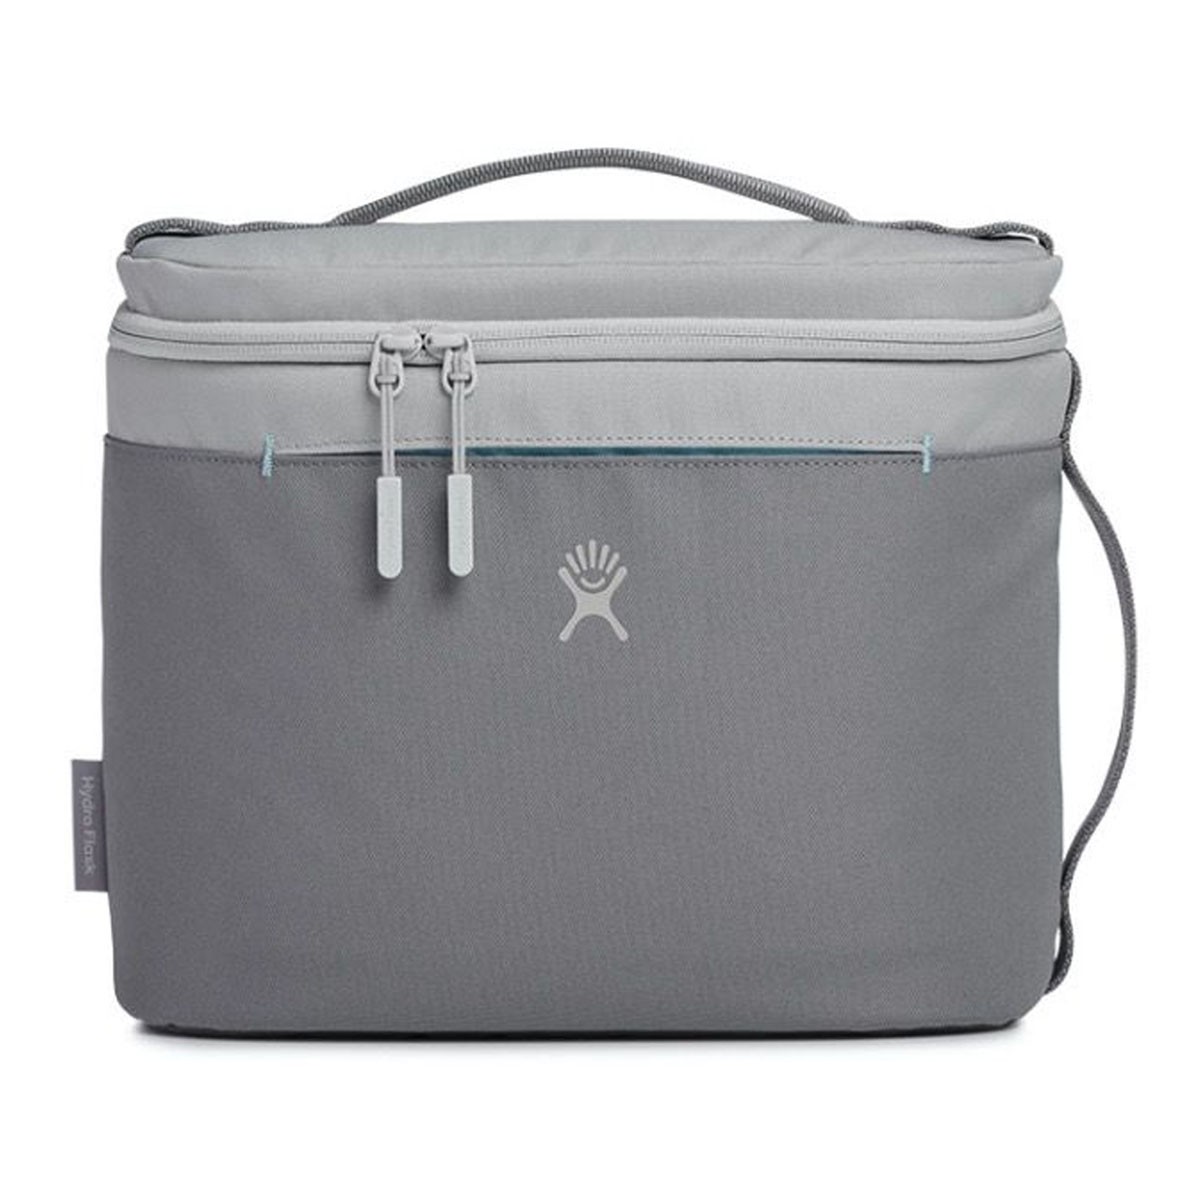 Hydro Flask Alpine 8L Insulated Lunch Tote